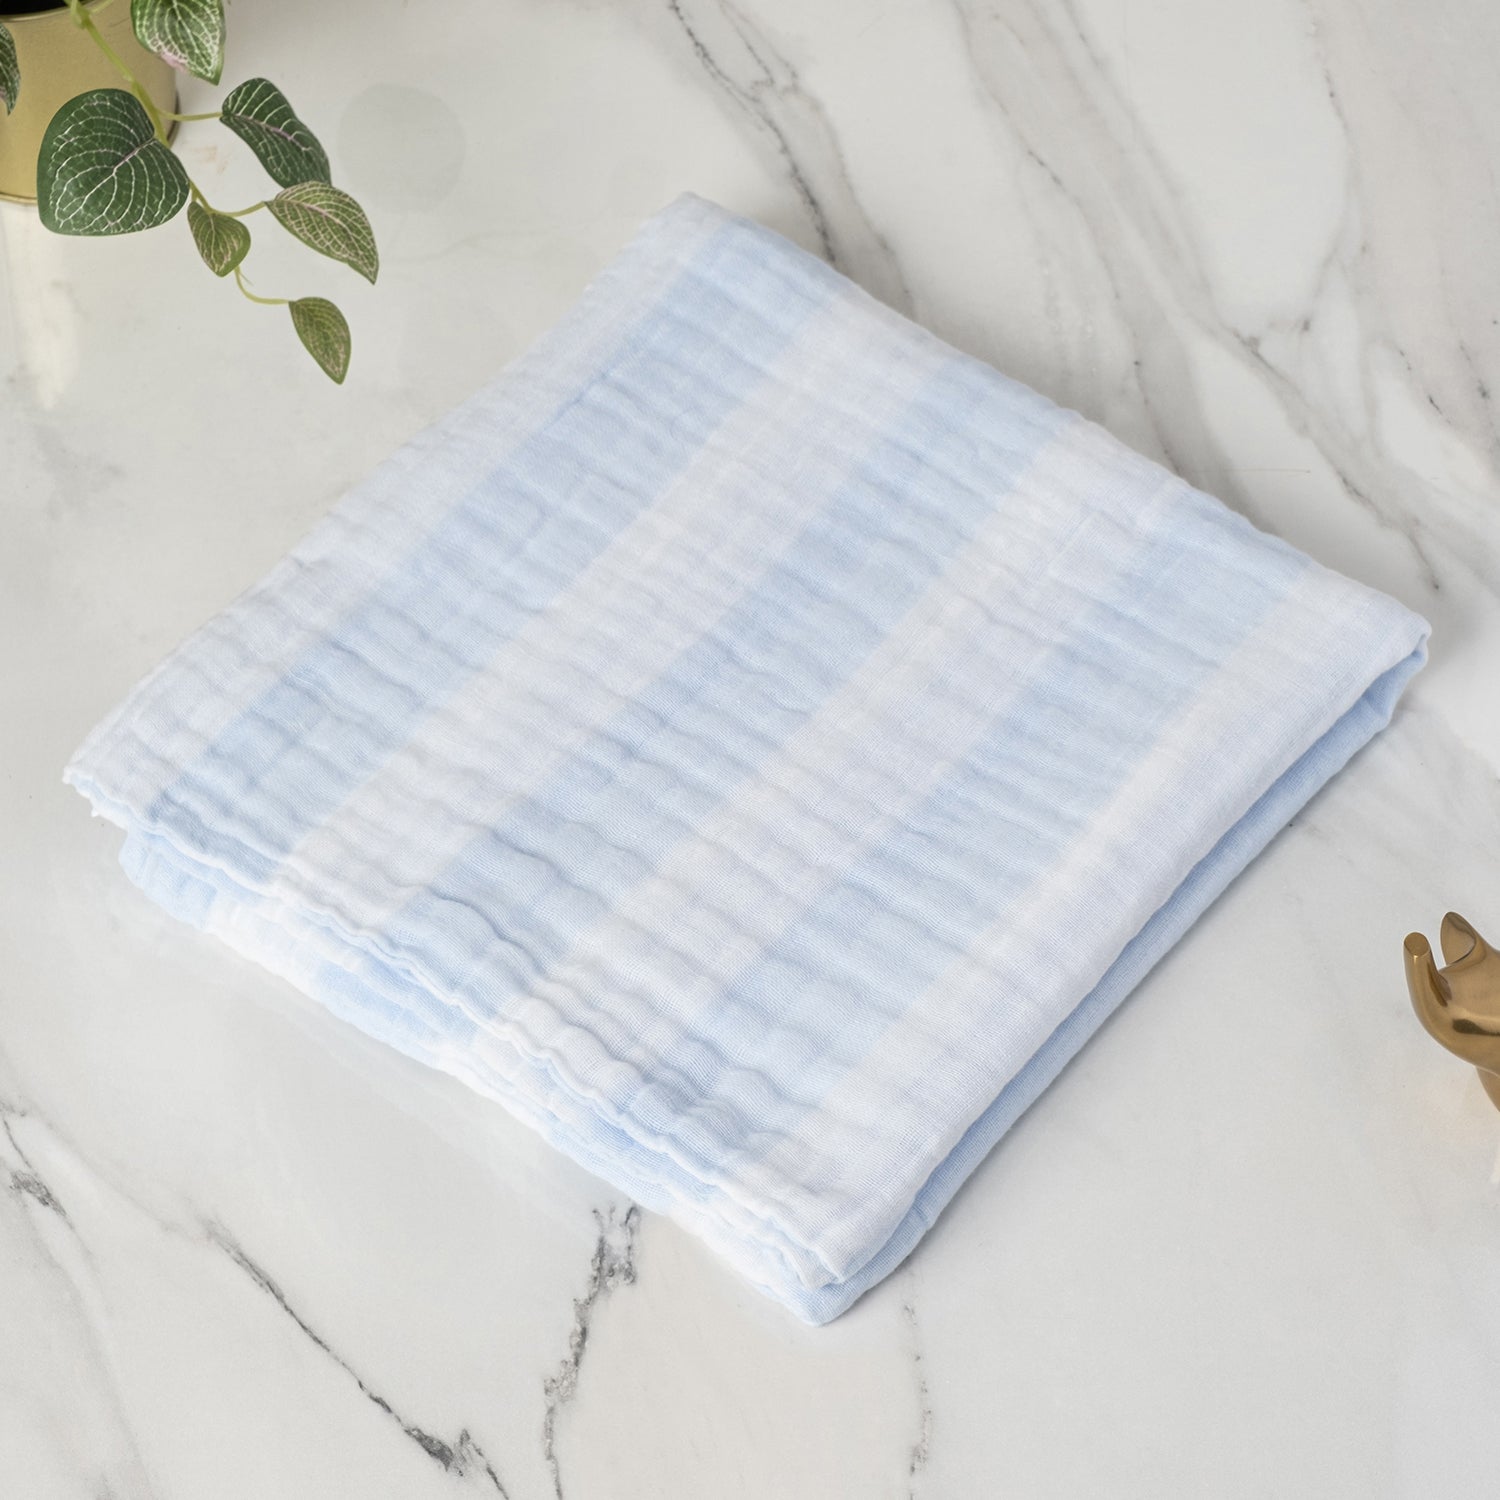 Baby Moo Premium Striped 100% Cotton Ultra Soft Eco Friendly Absorbent Towel - Blue